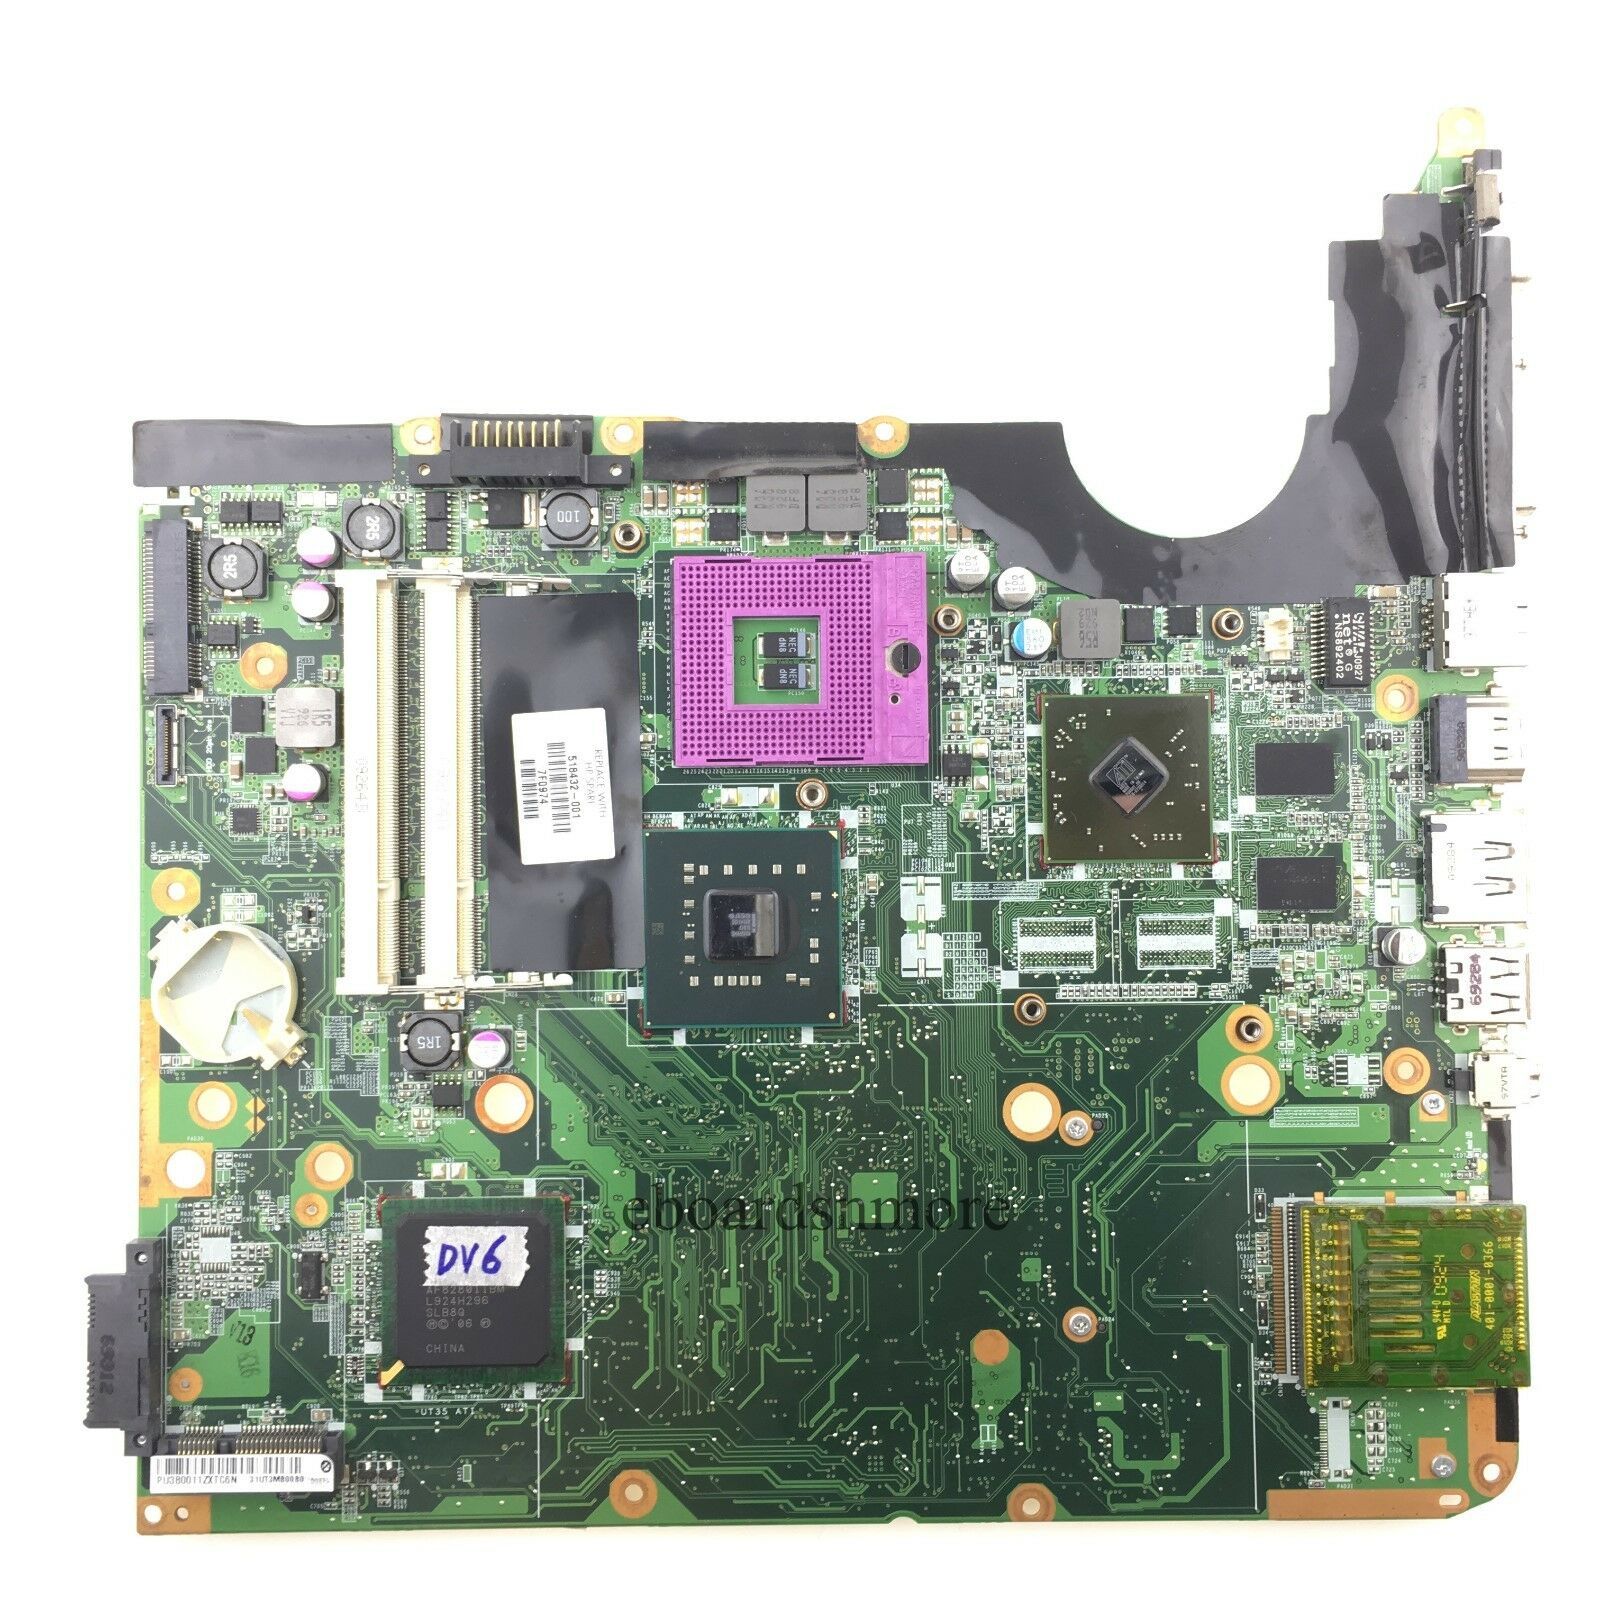 518432-001 for HP DV6 Series Intel motherboard with ATI Radeon Graphics Grade A Compatible CPU Brand: Intel